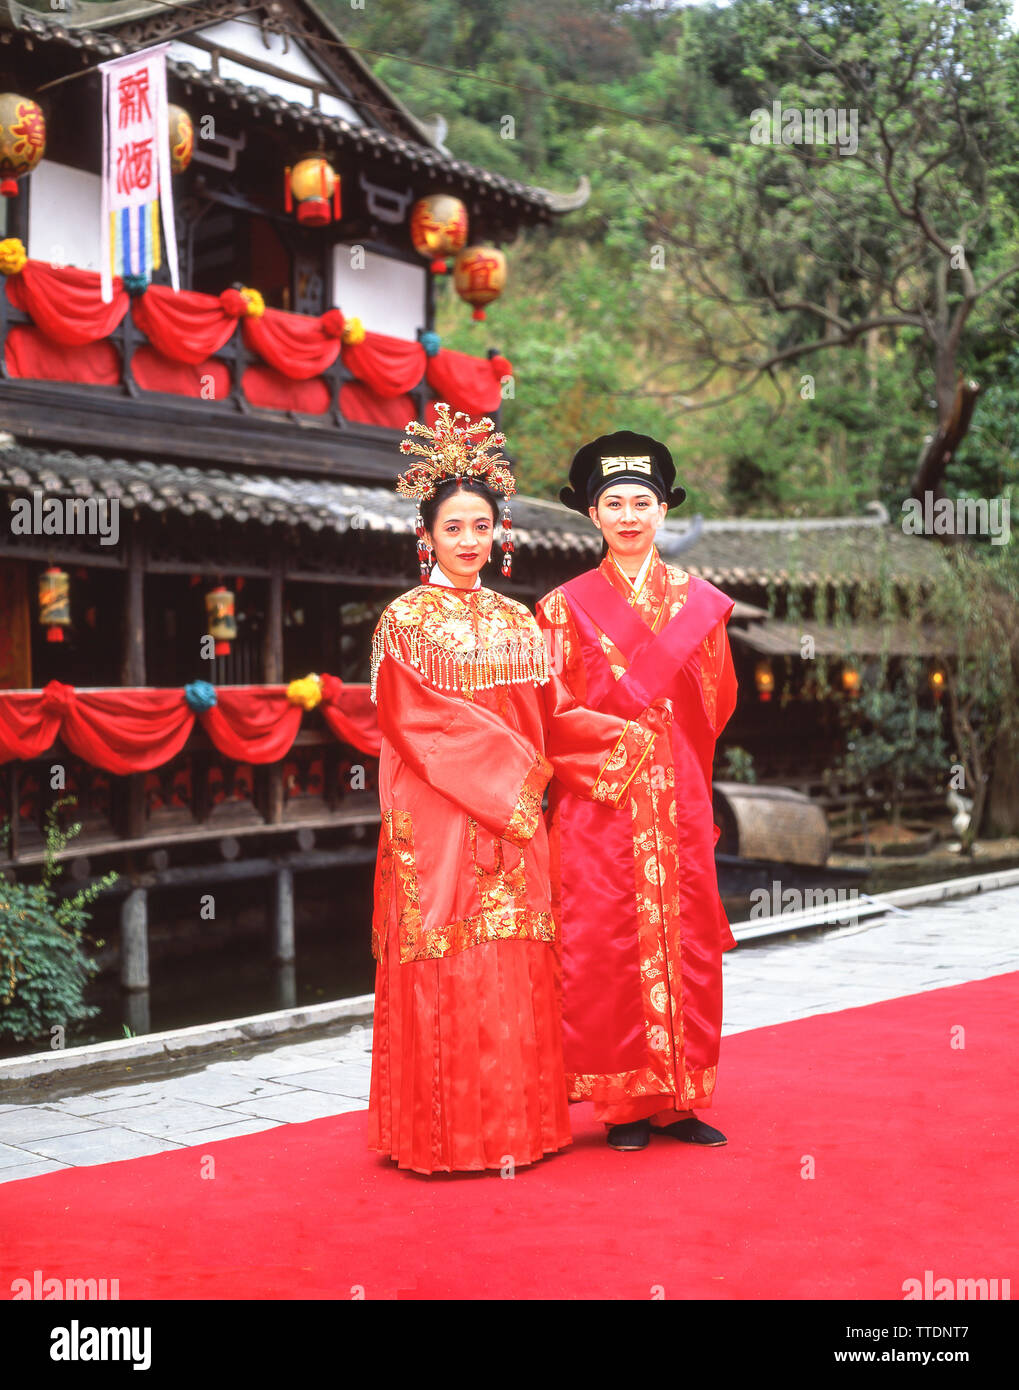 Wedding couple in national costume, Sung Dynasty Village, Kowloon, Hong Kong, People's Republic of China Stock Photo